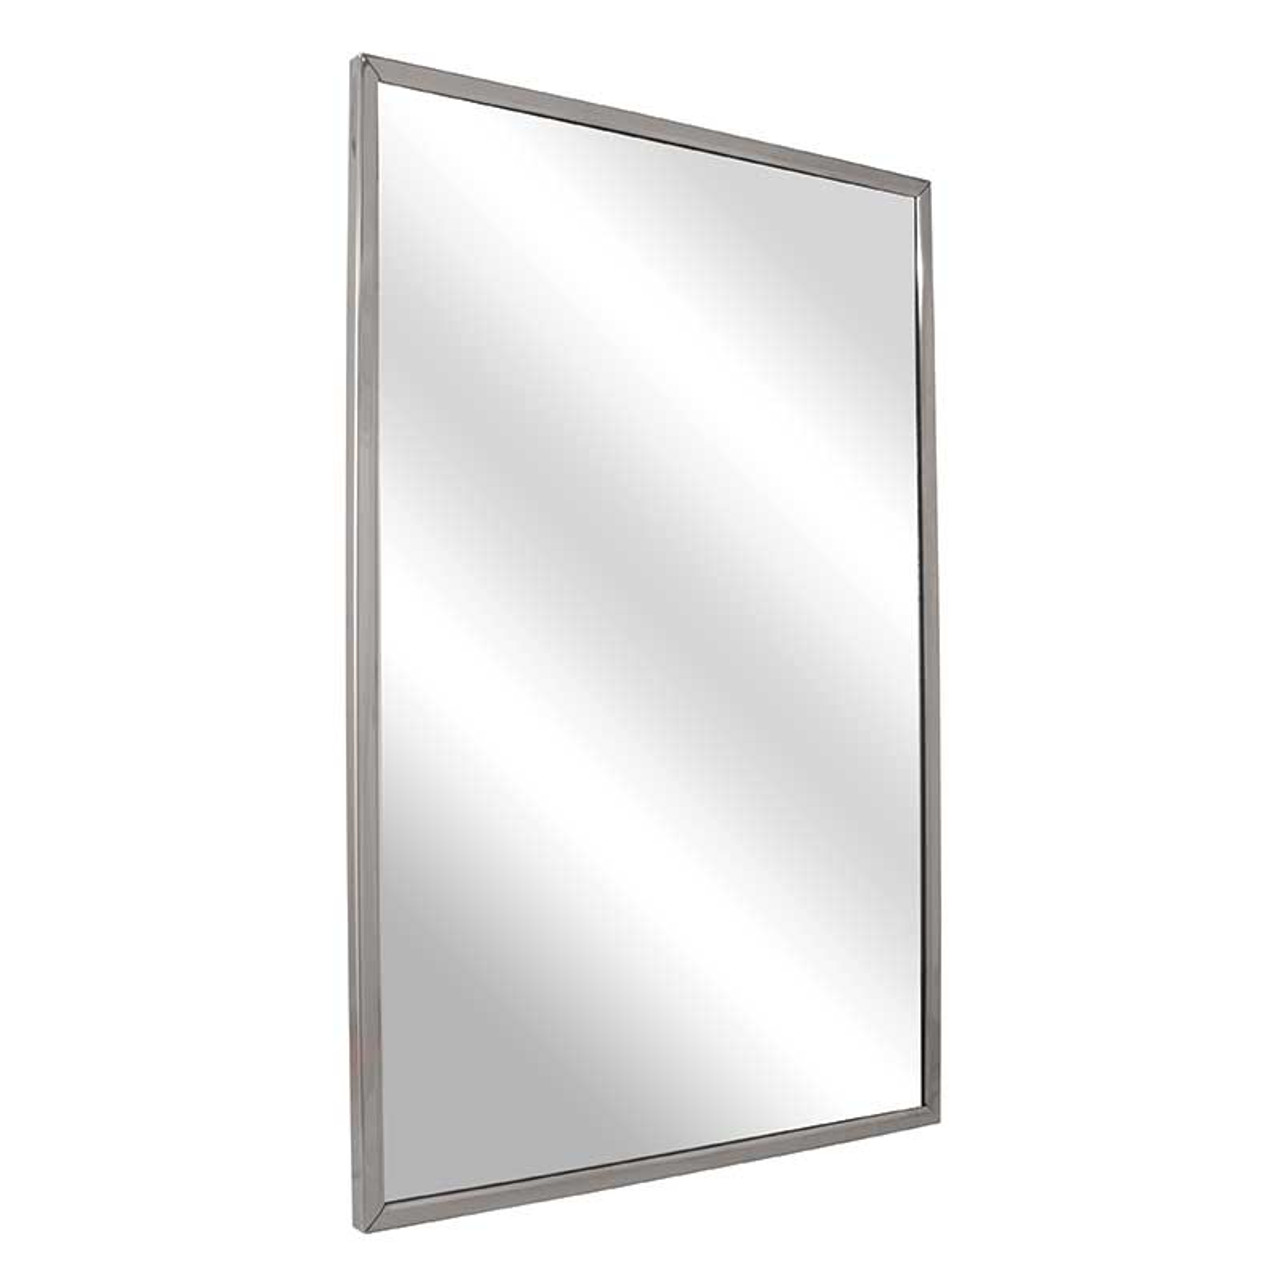 Bradley Stainless Steel Channel Frame Mirror - Tempered Glass